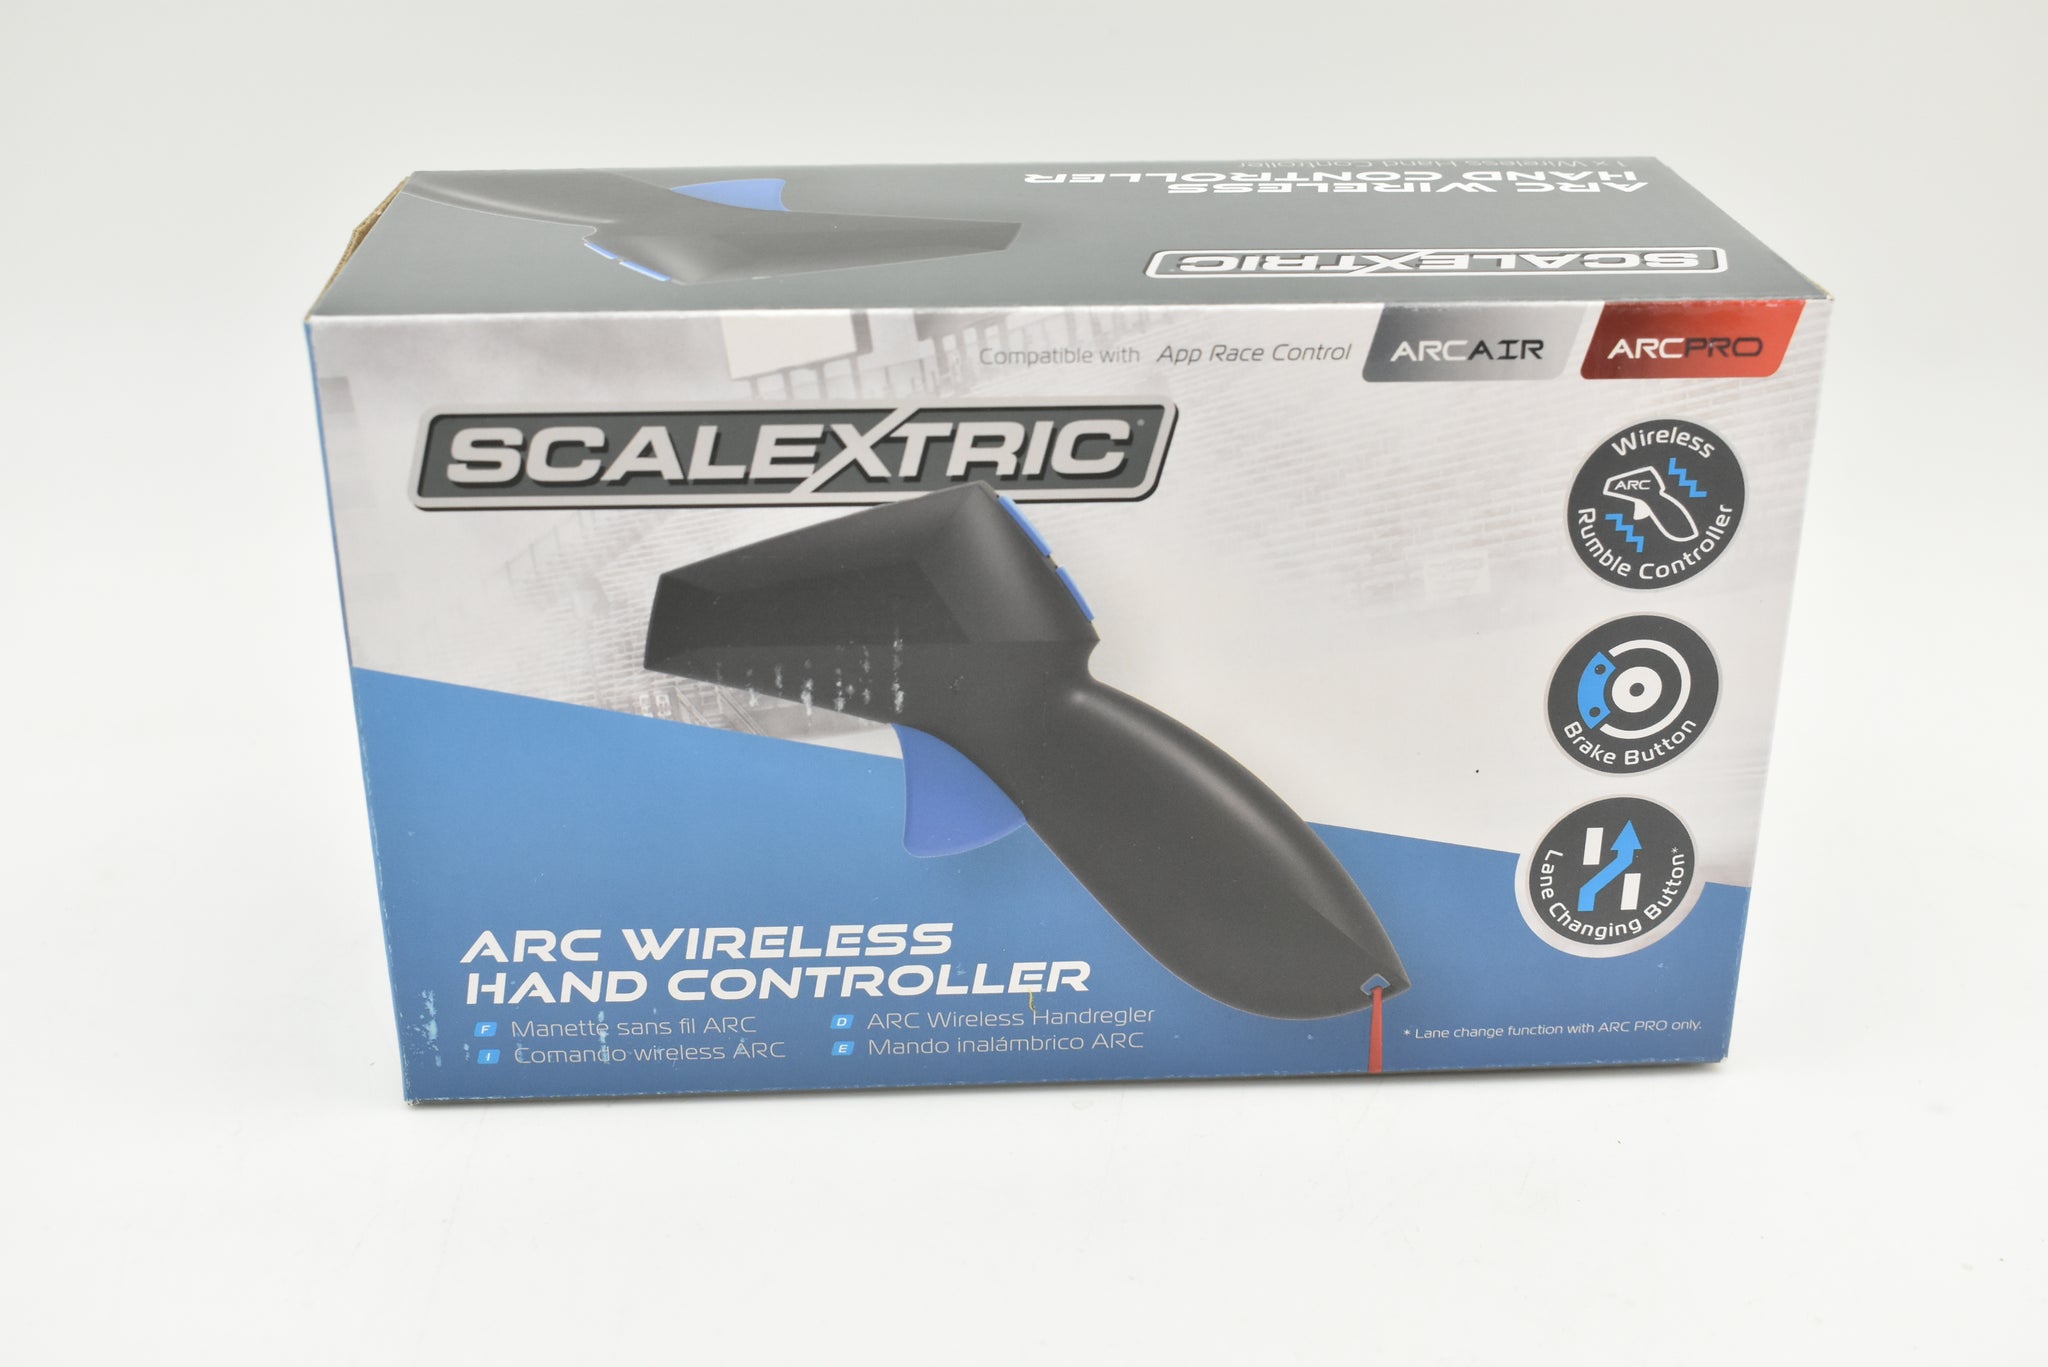 Hands-on: Scalextric RCS Race Control System